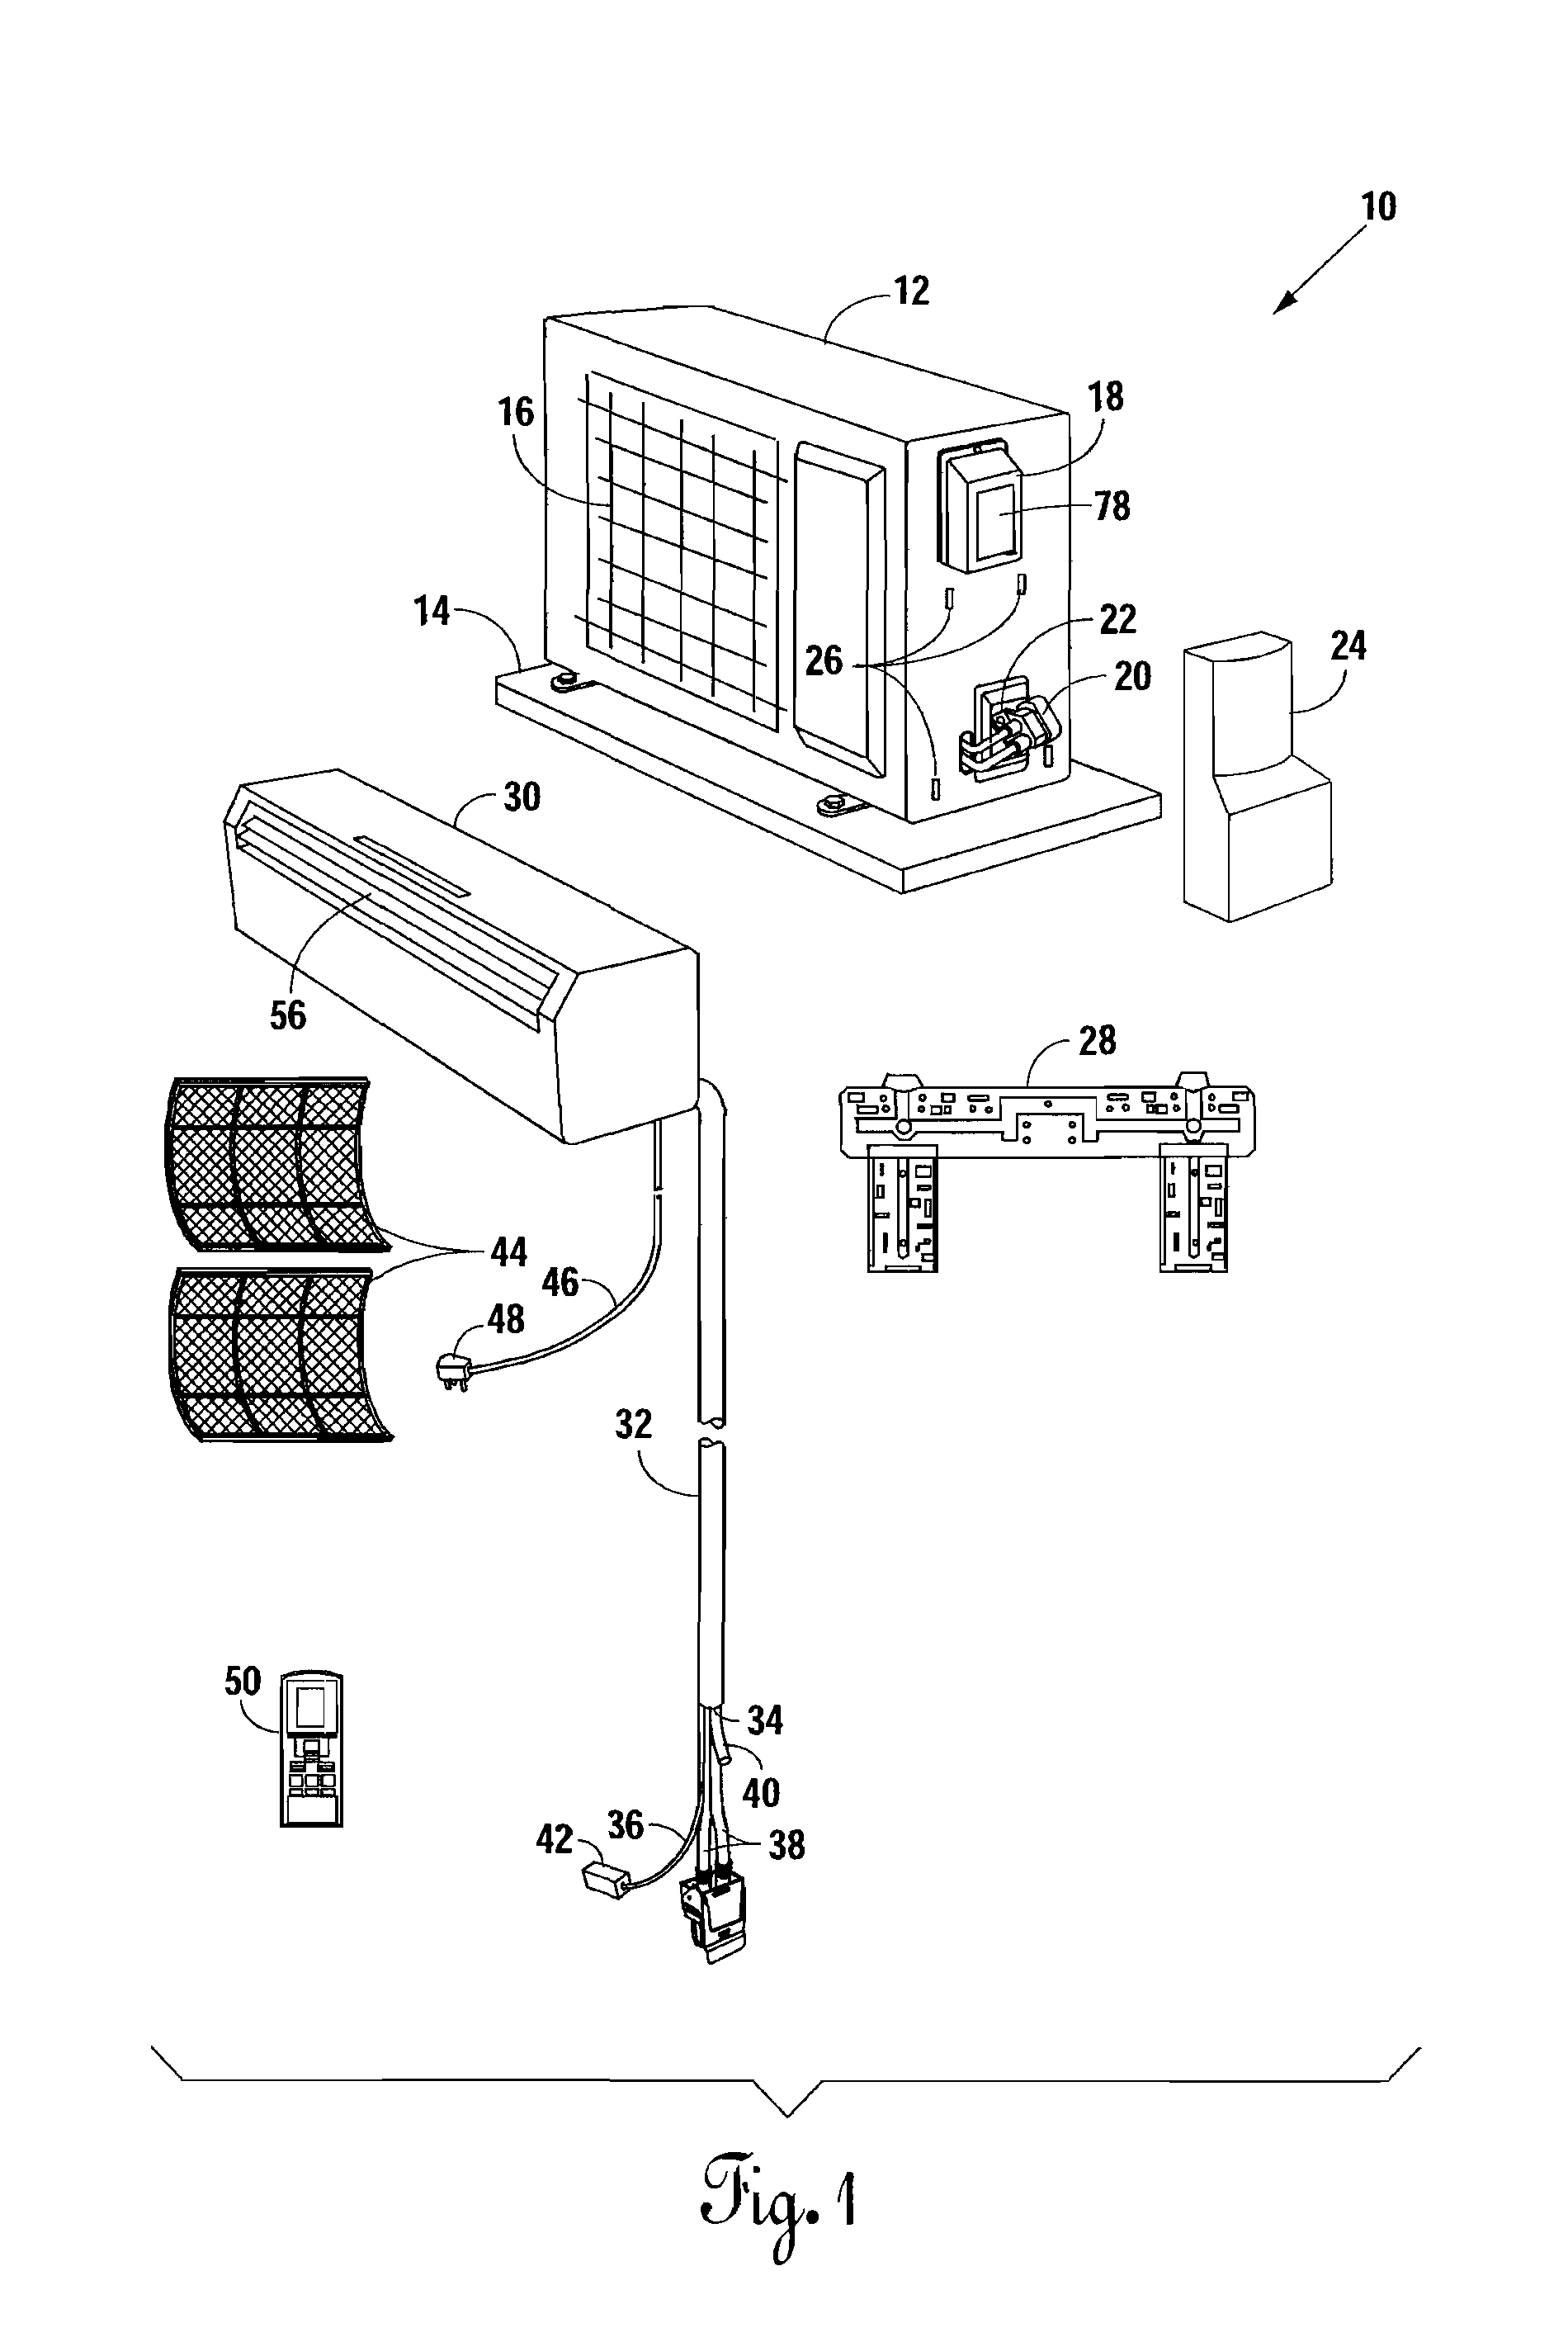 Apparatus and method for installation by unlicensed personnel of a pre-charged, ductless heating/cooling system